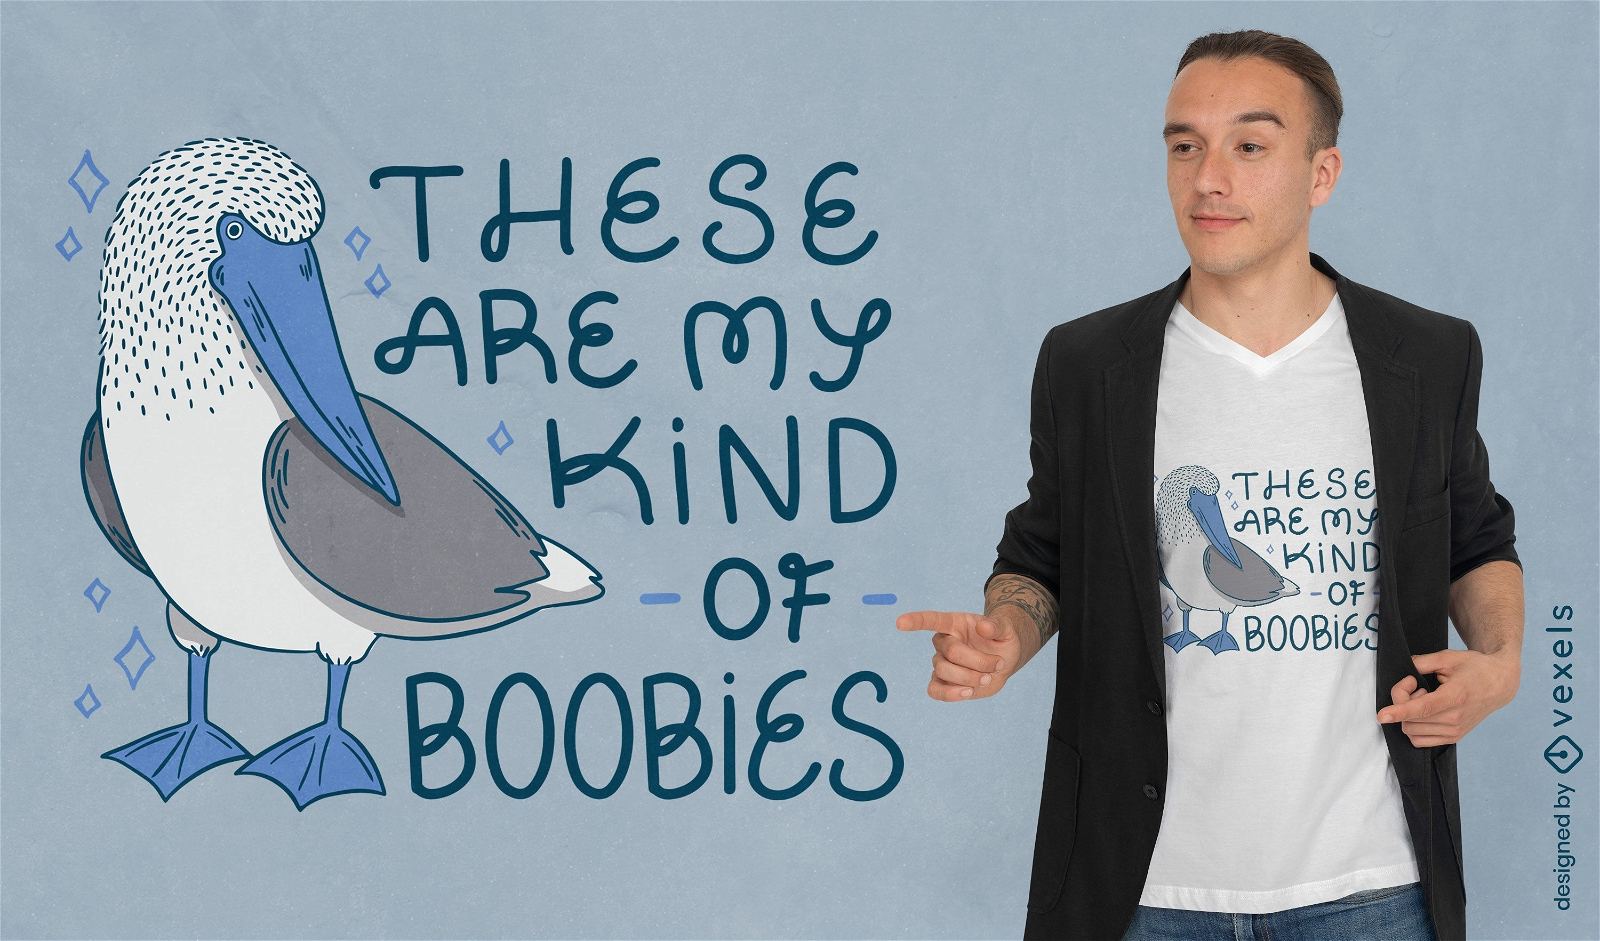 My kind of boobies funny t-shirt design